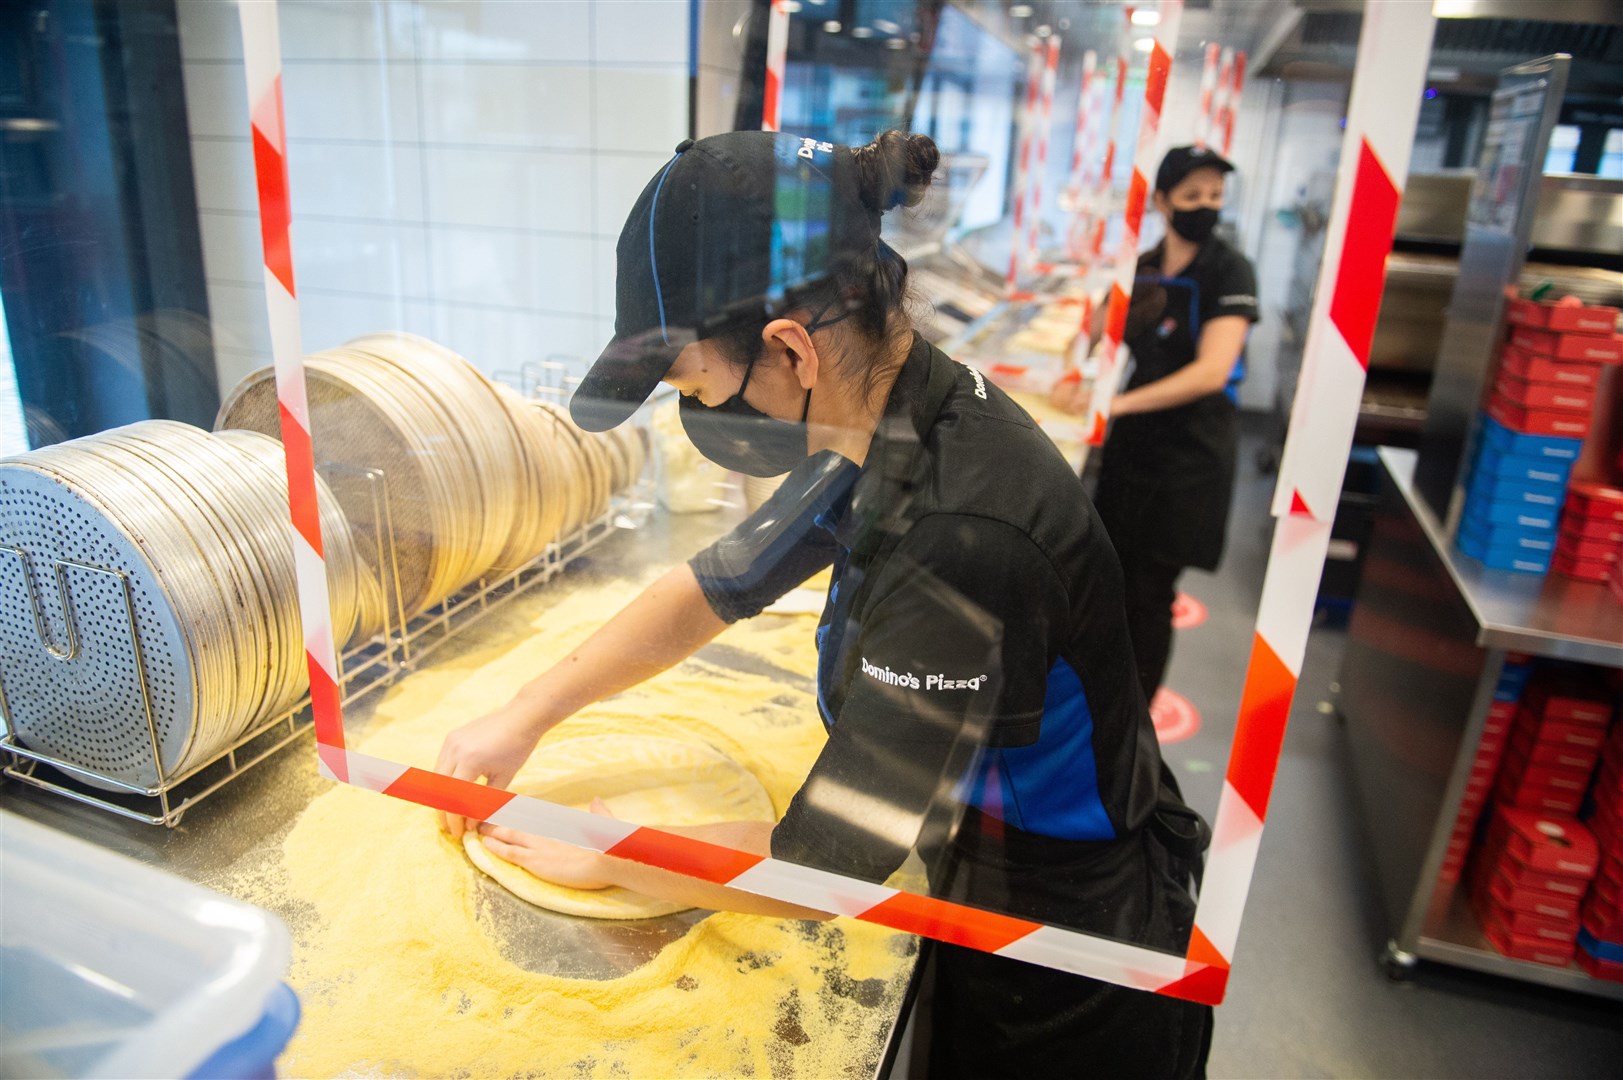 Domino’s spent £9 million upgrading stores to become Covid-secure (Domino’s/PA)